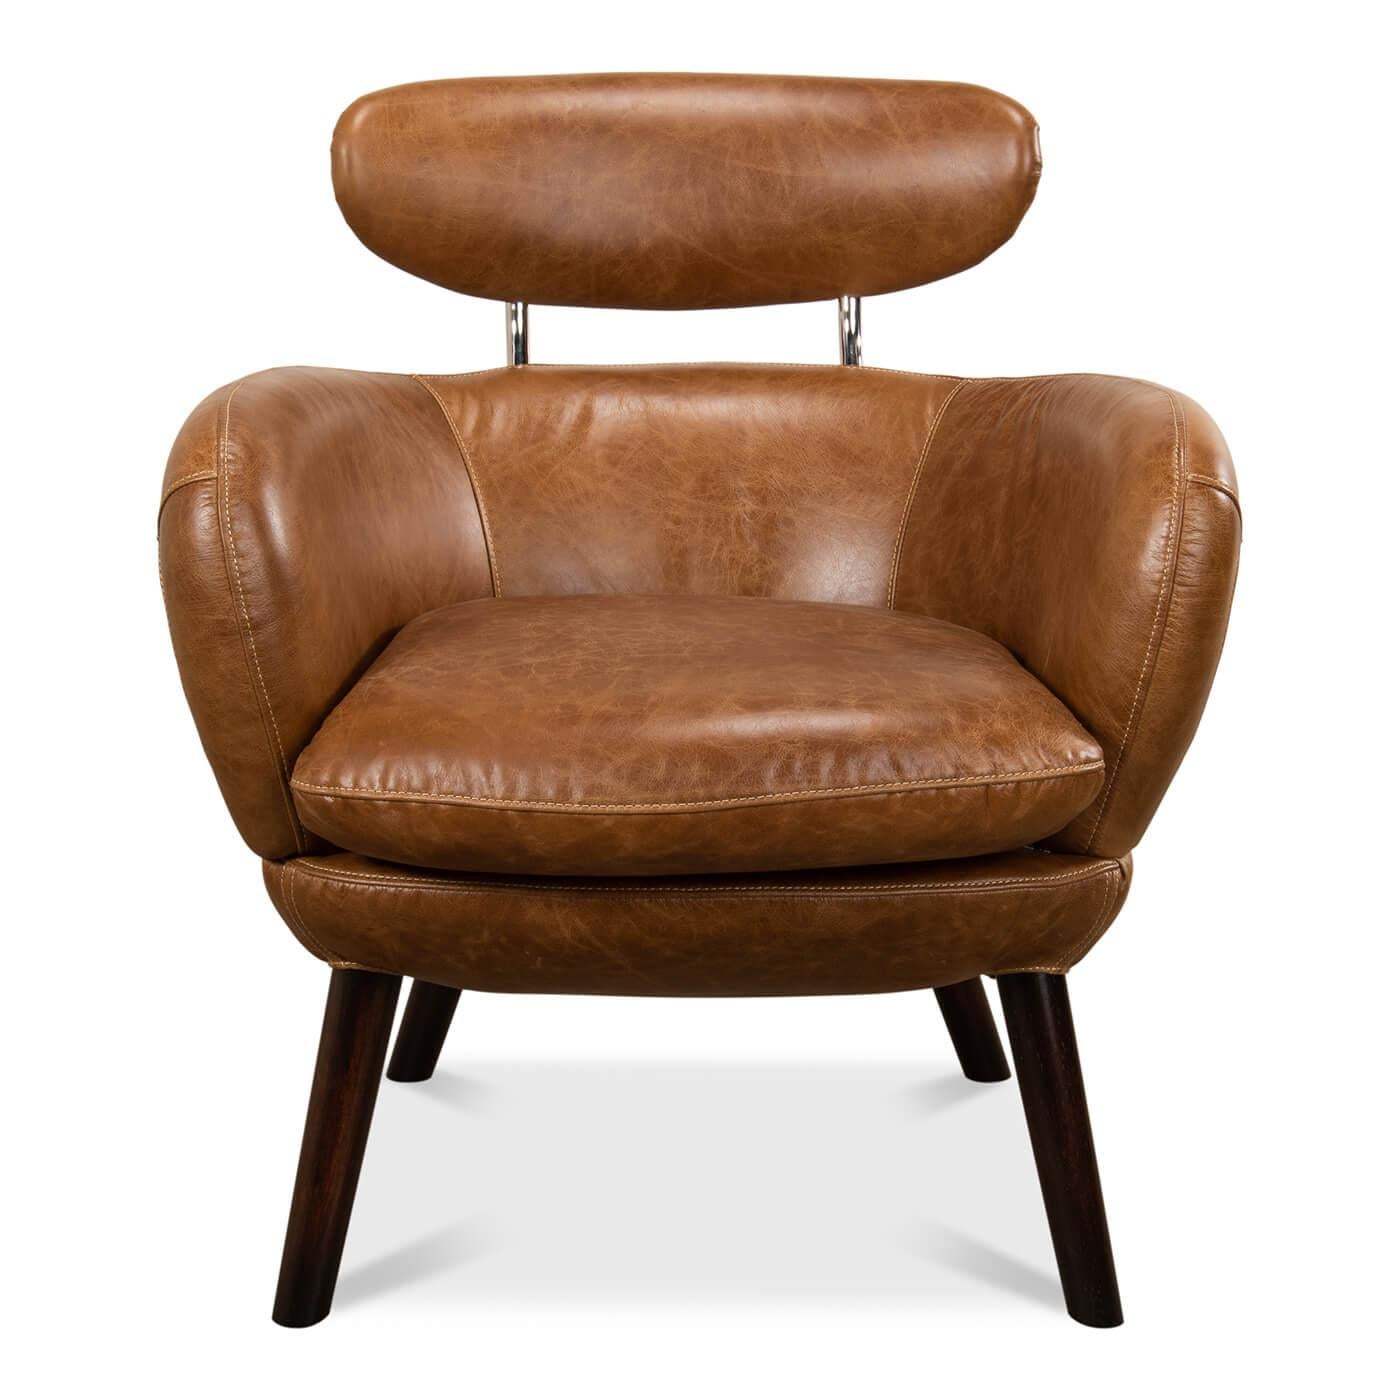 Mid-Century Modern style leather upholstered armchair with a floating headrest, with vintage style aniline top grade brown leather with a tub back form, cushion seat and raised on splayed legs.

Dimensions: 28